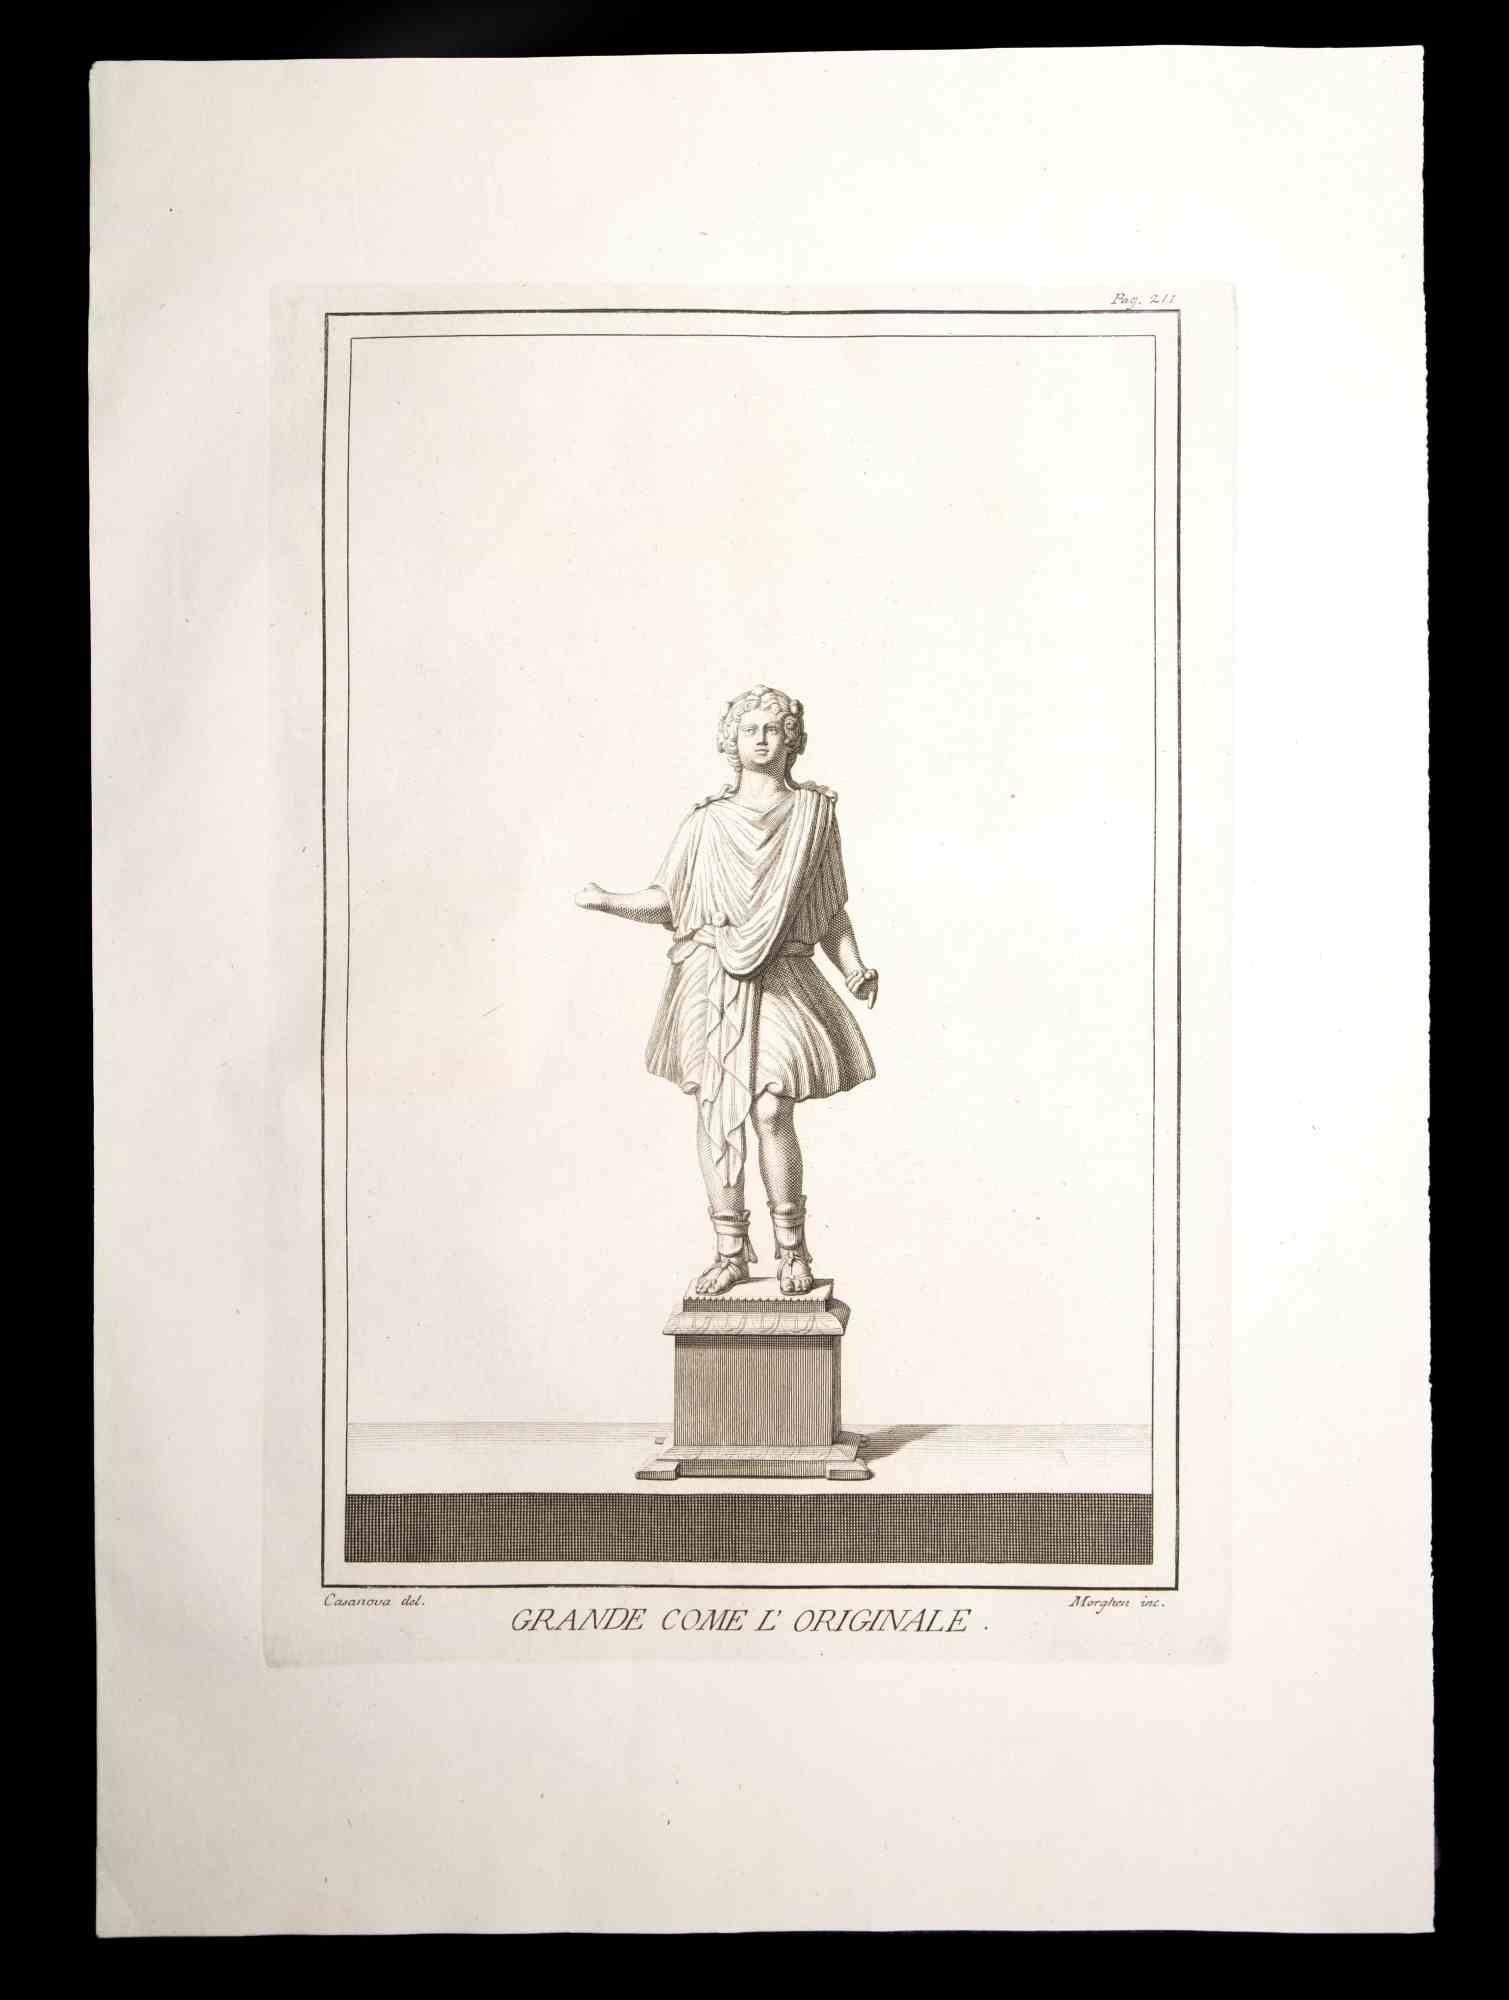 Ancient Roman Statue, from the series "Antiquities of Herculaneum", is an etching on paper realized by Morghen in the 18th century.

Signed on the plate, on the lower right.

Good conditions.

The etching belongs to the print suite “Antiquities of